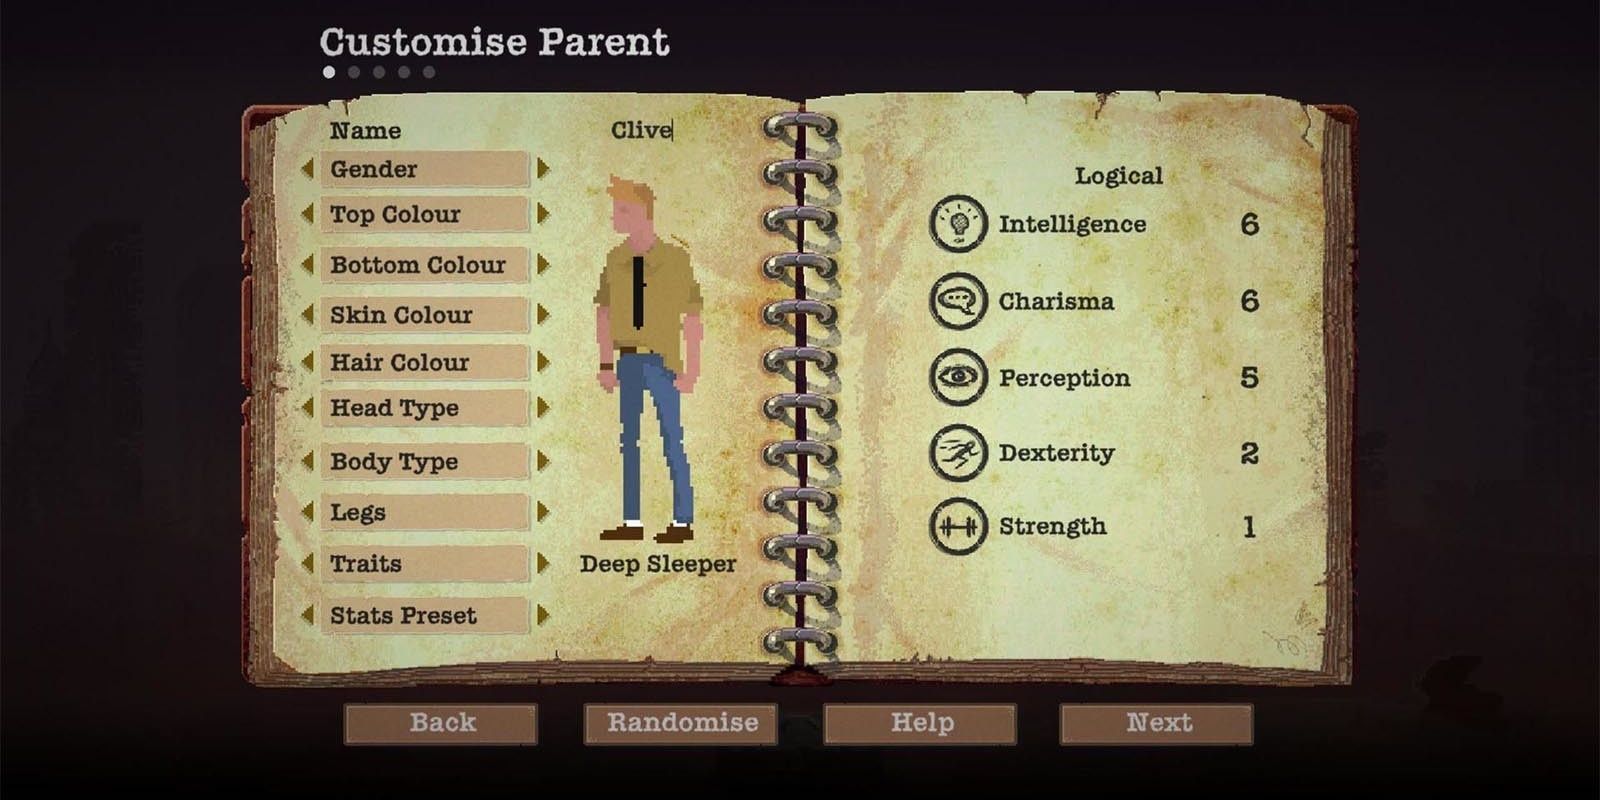 The family customization screen in Sheltered.